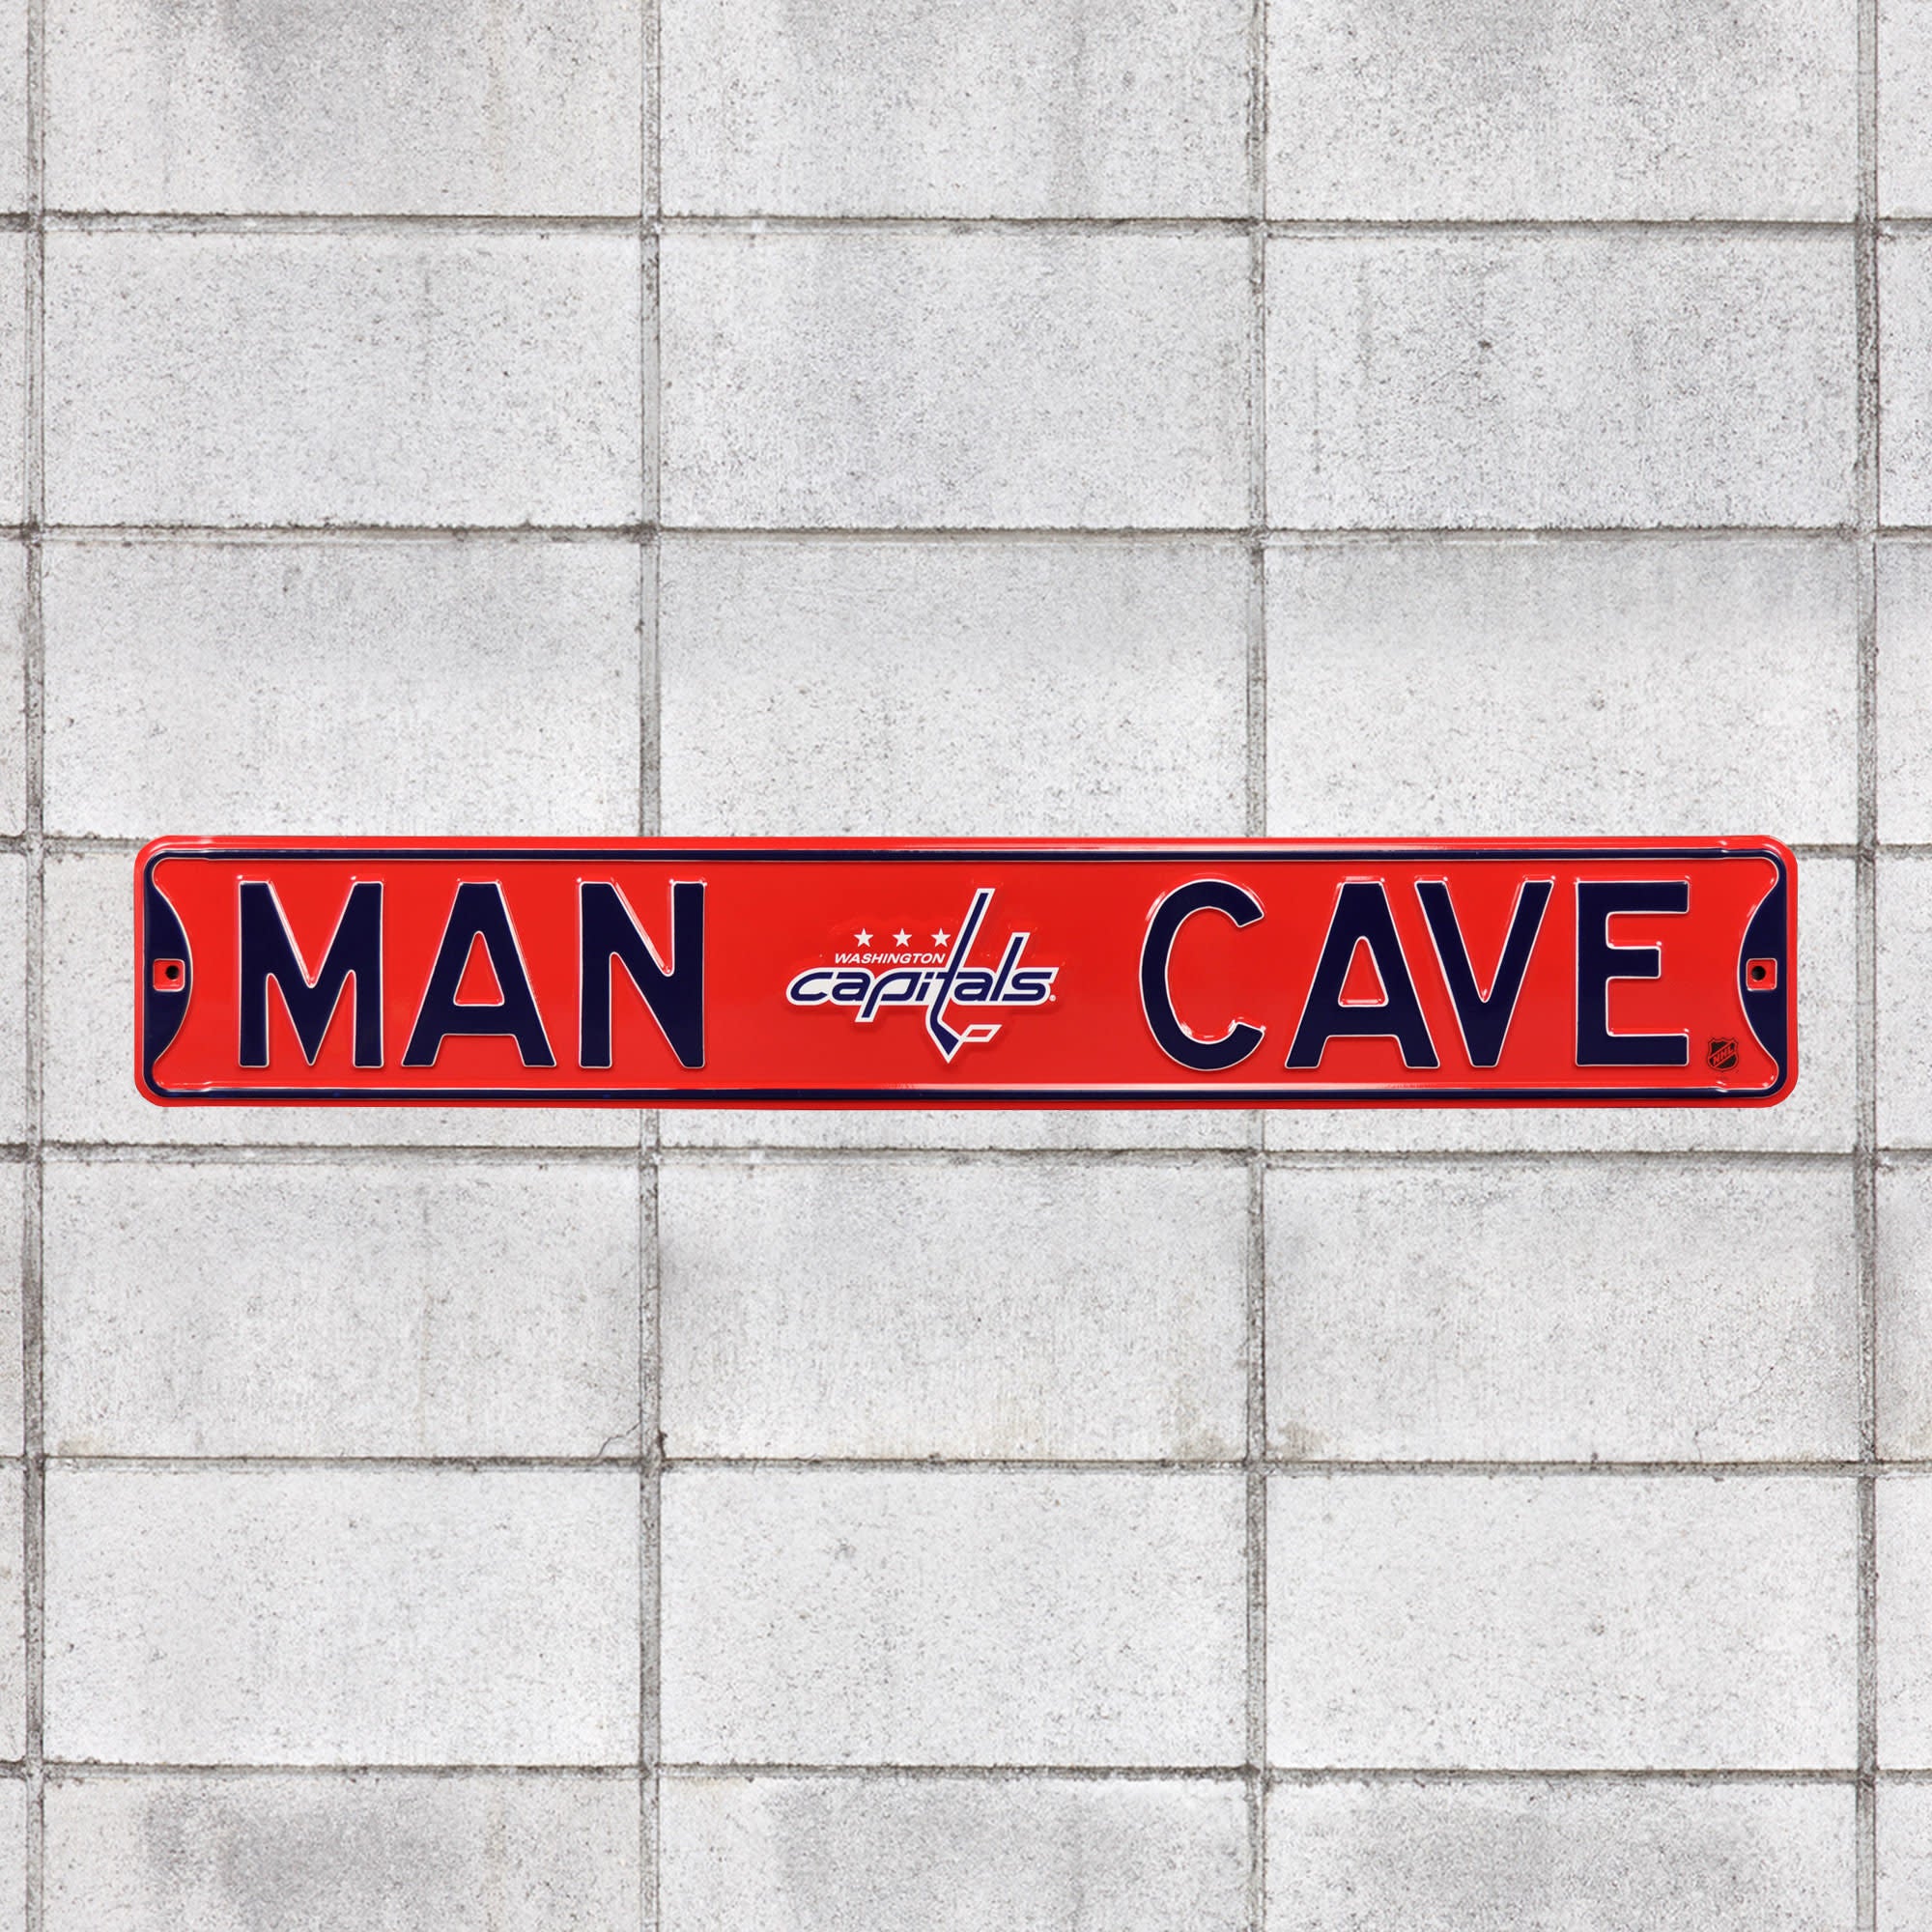 Washington Capitals: Man Cave - Officially Licensed NHL Metal Street Sign 36.0"W x 6.0"H by Fathead | 100% Steel